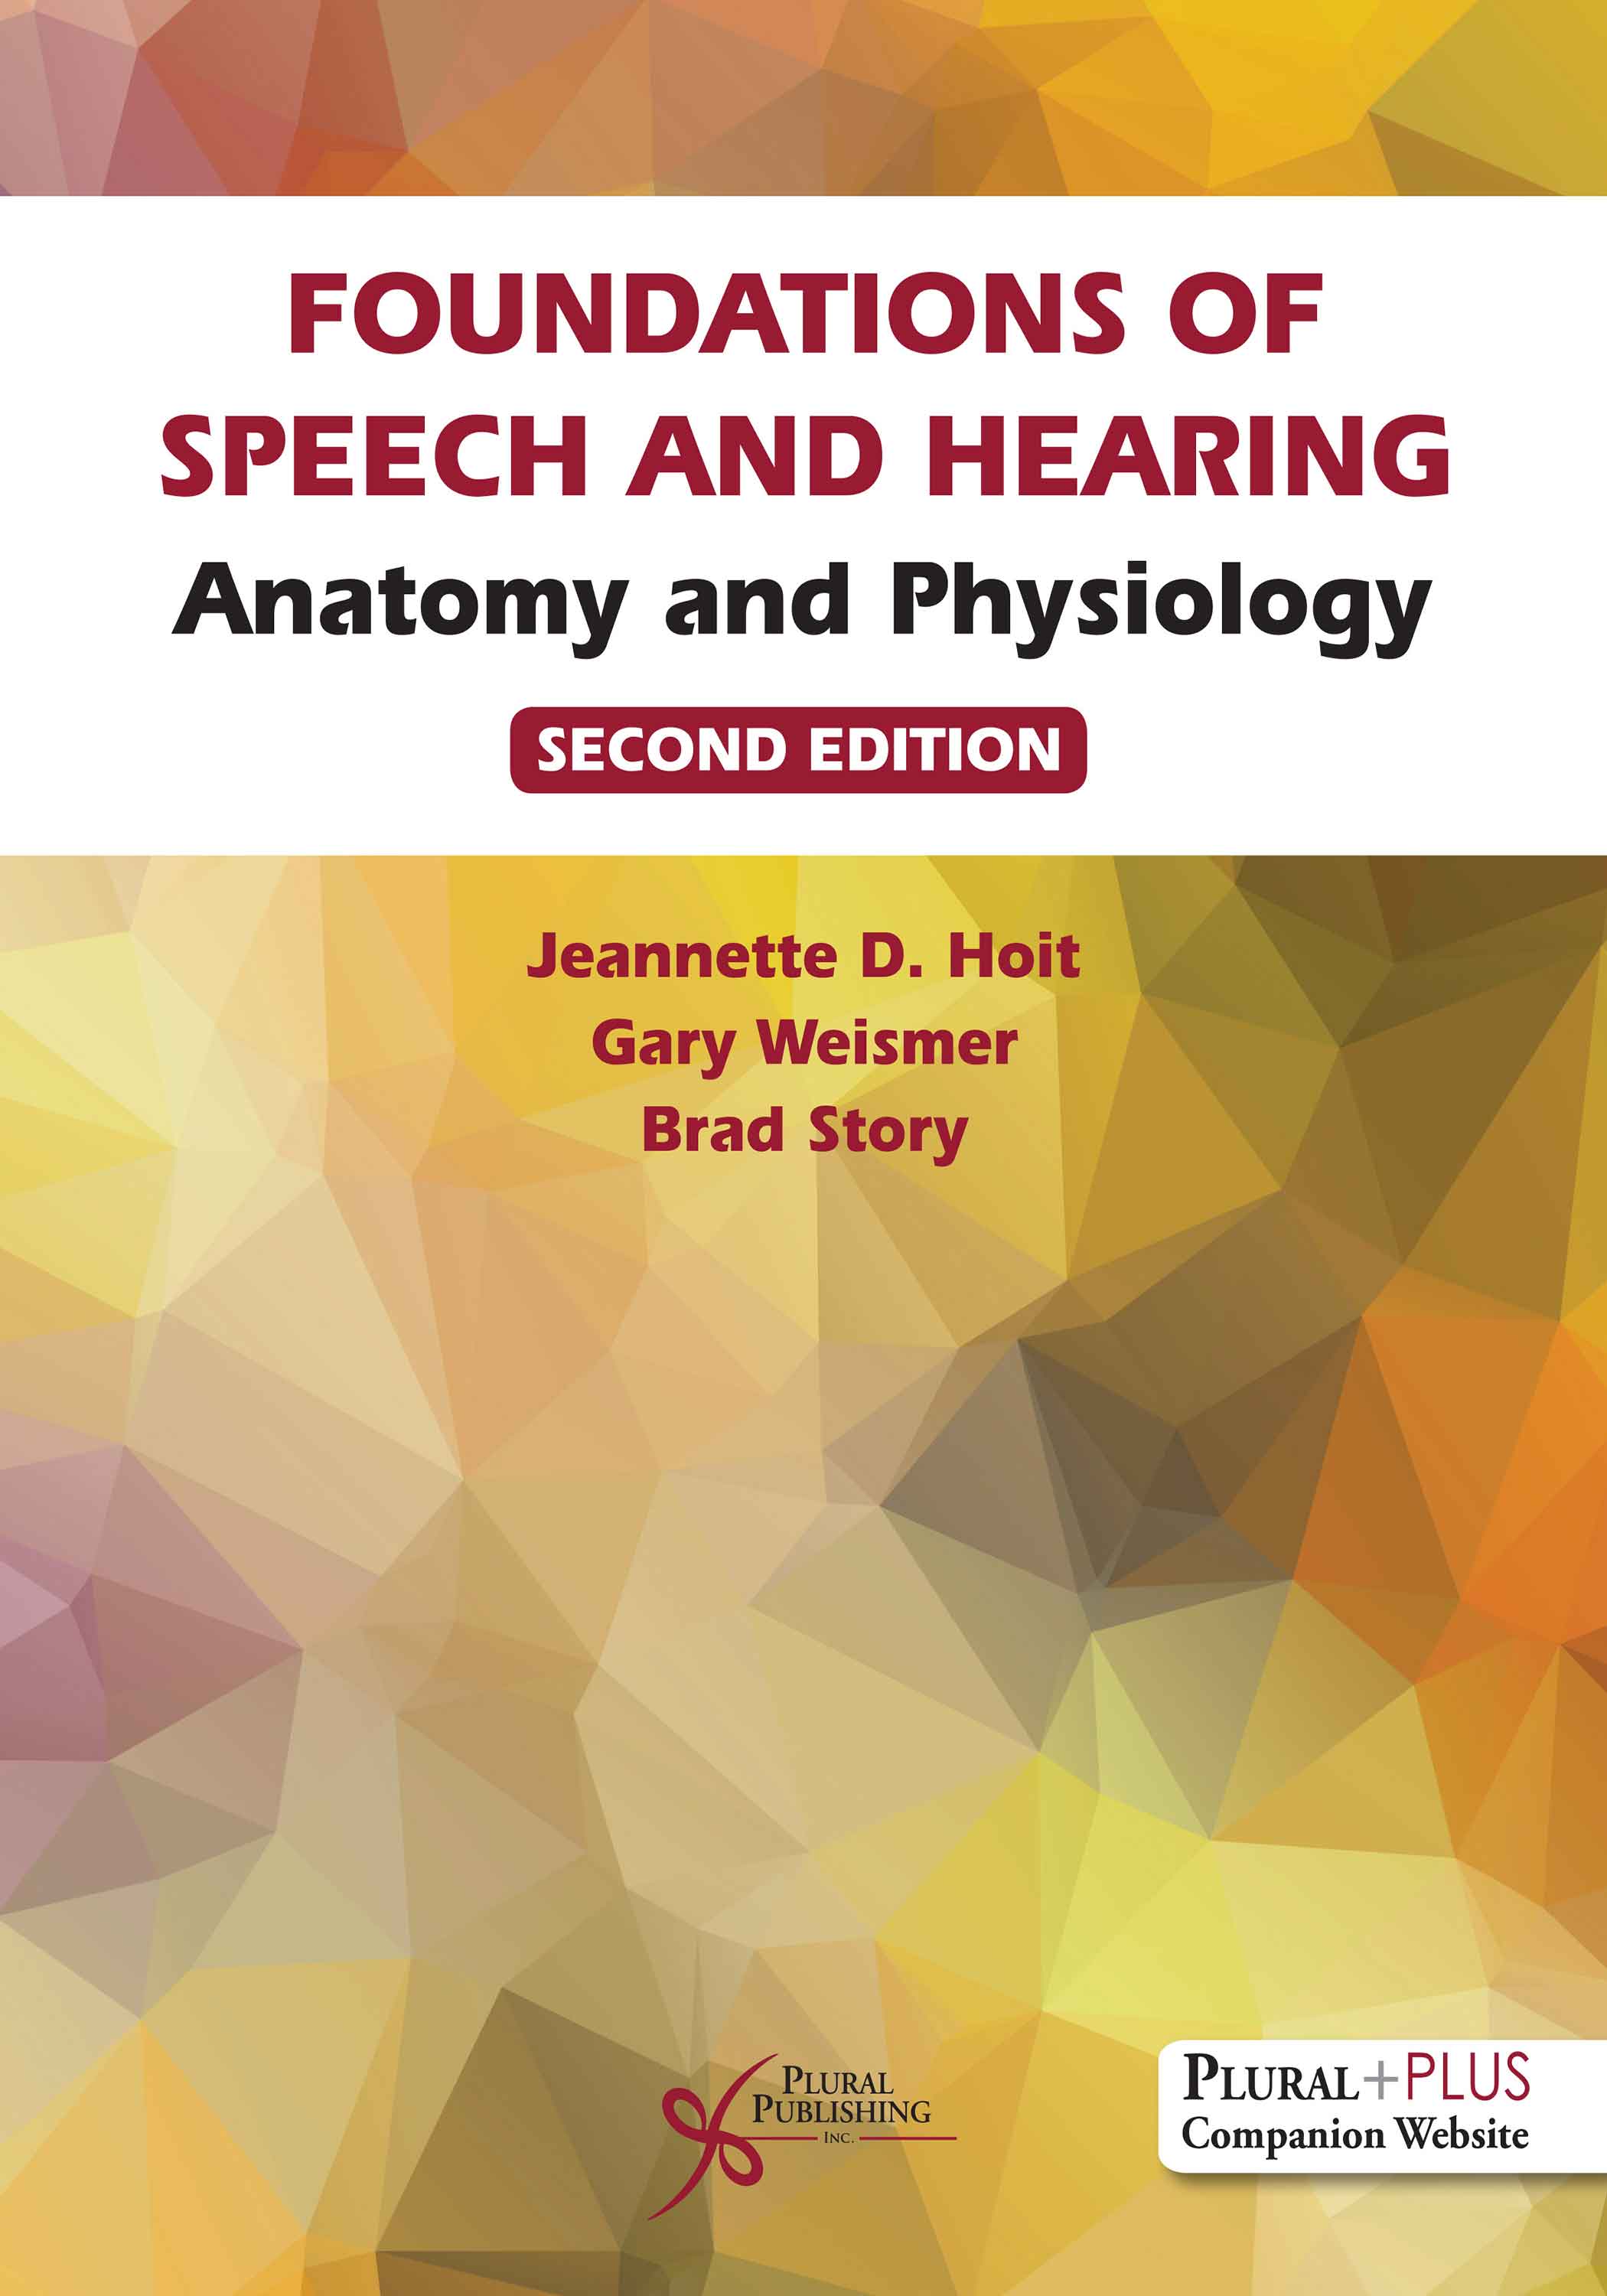 Anatomy and physiology for speech language and hearing 6th edition Publications Plural Publishing